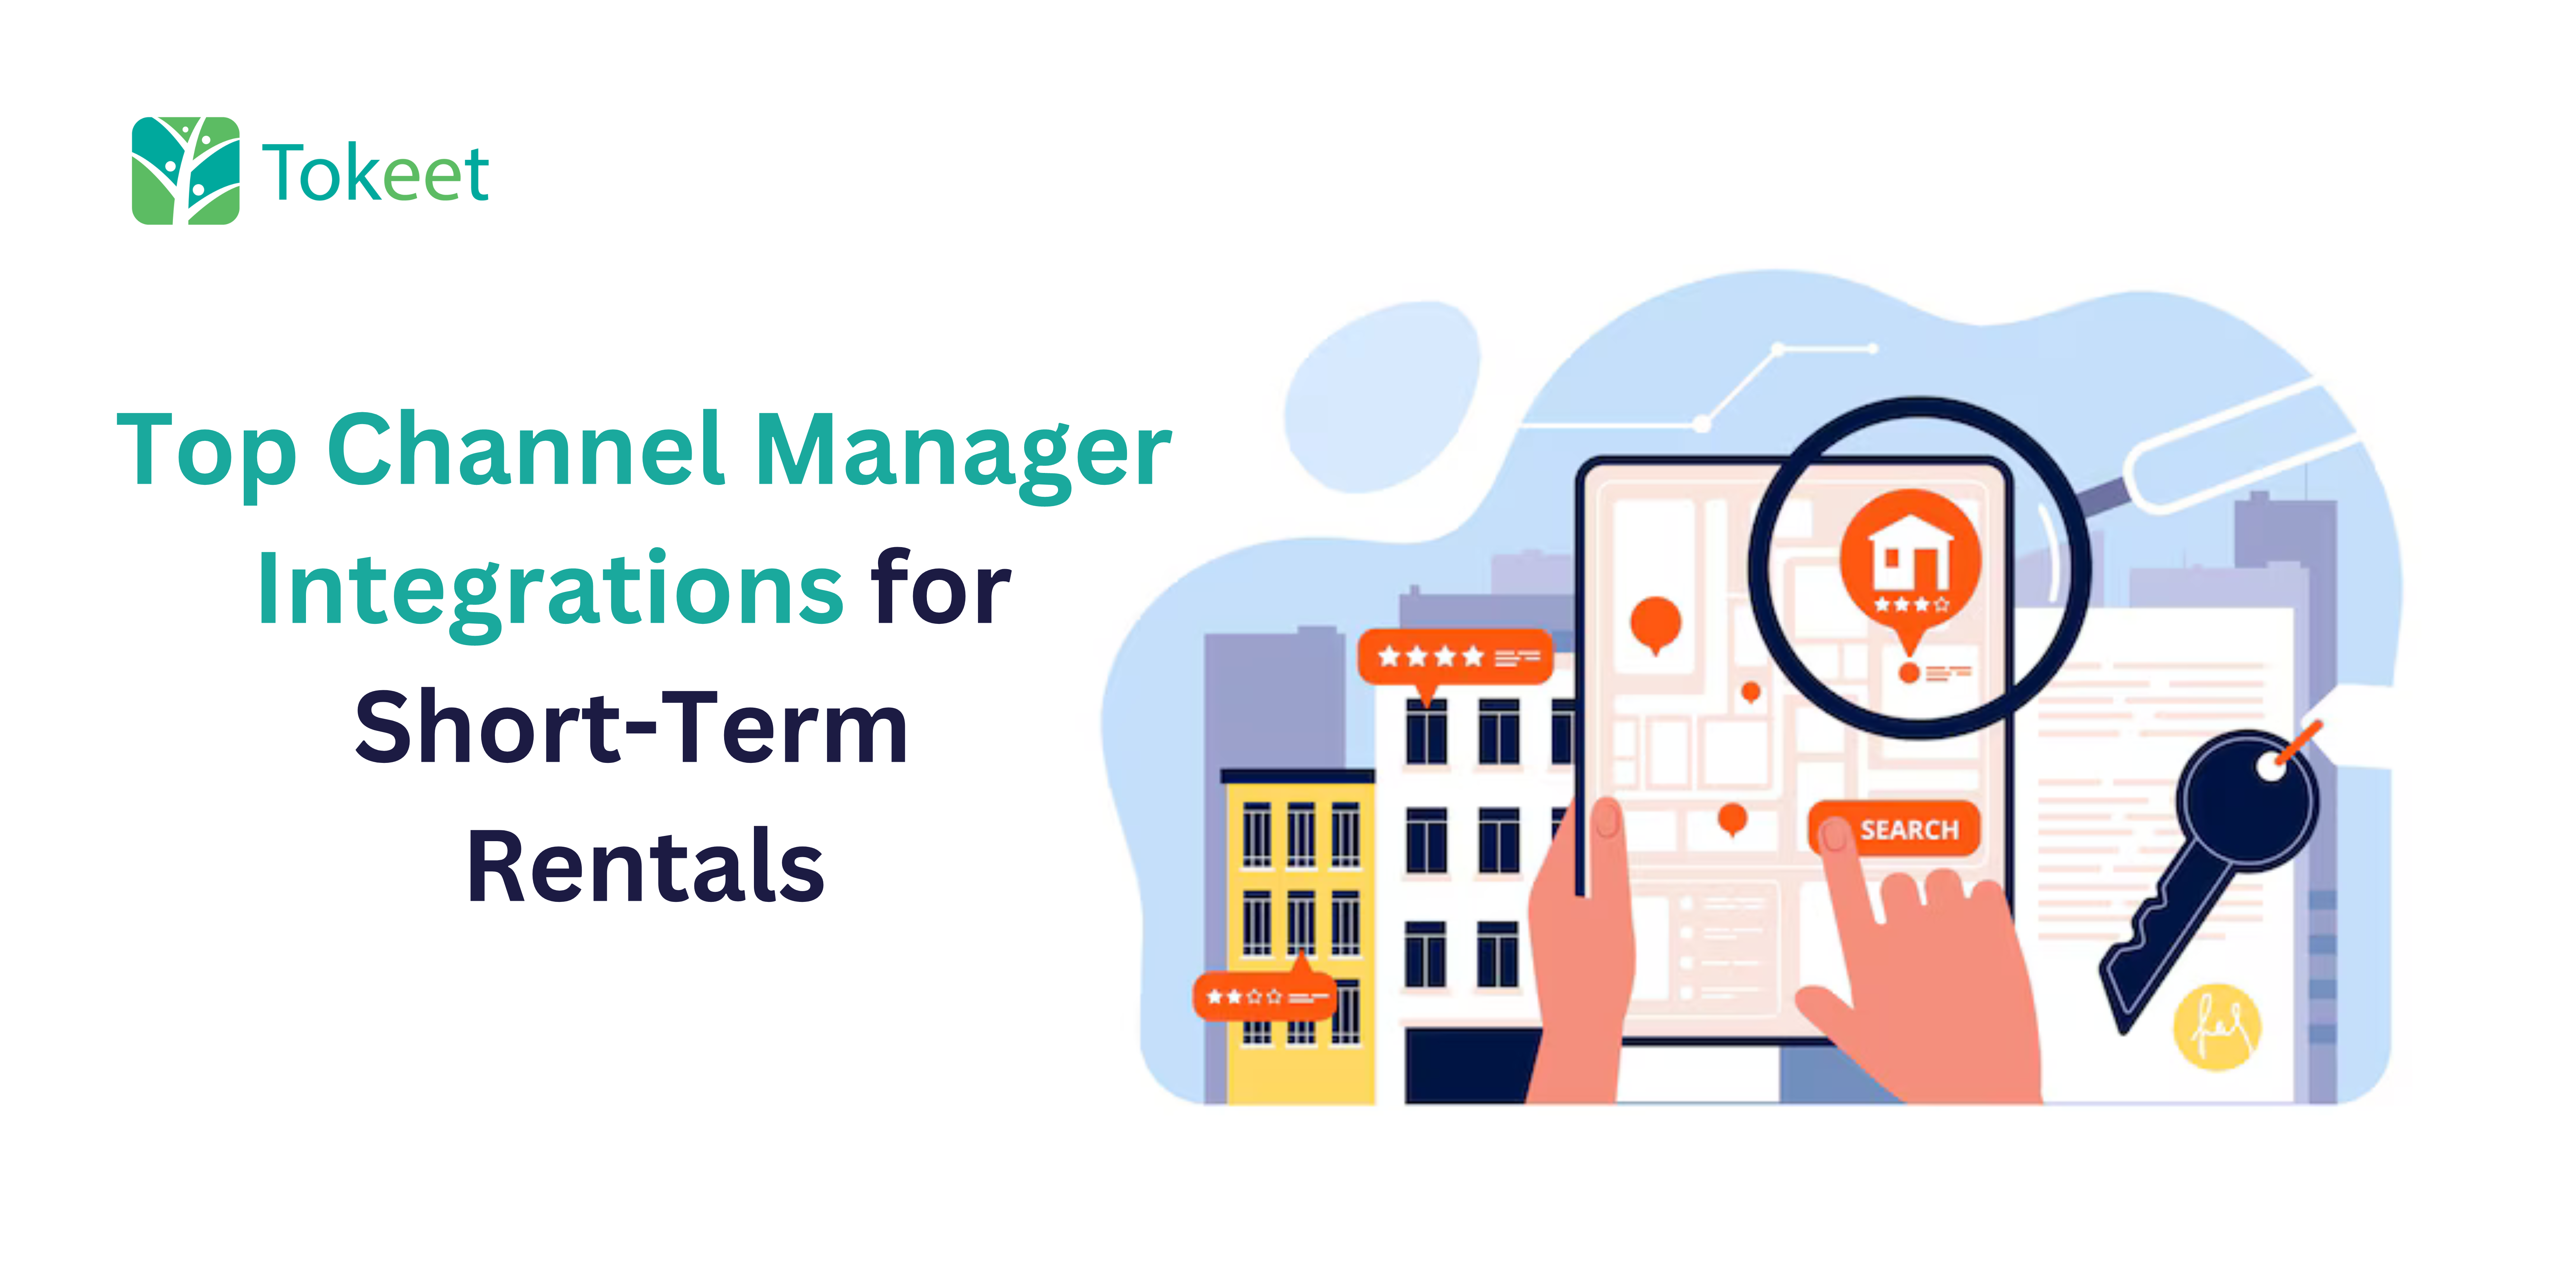 Top Channel Manager Integrations for Short-Term Rentals